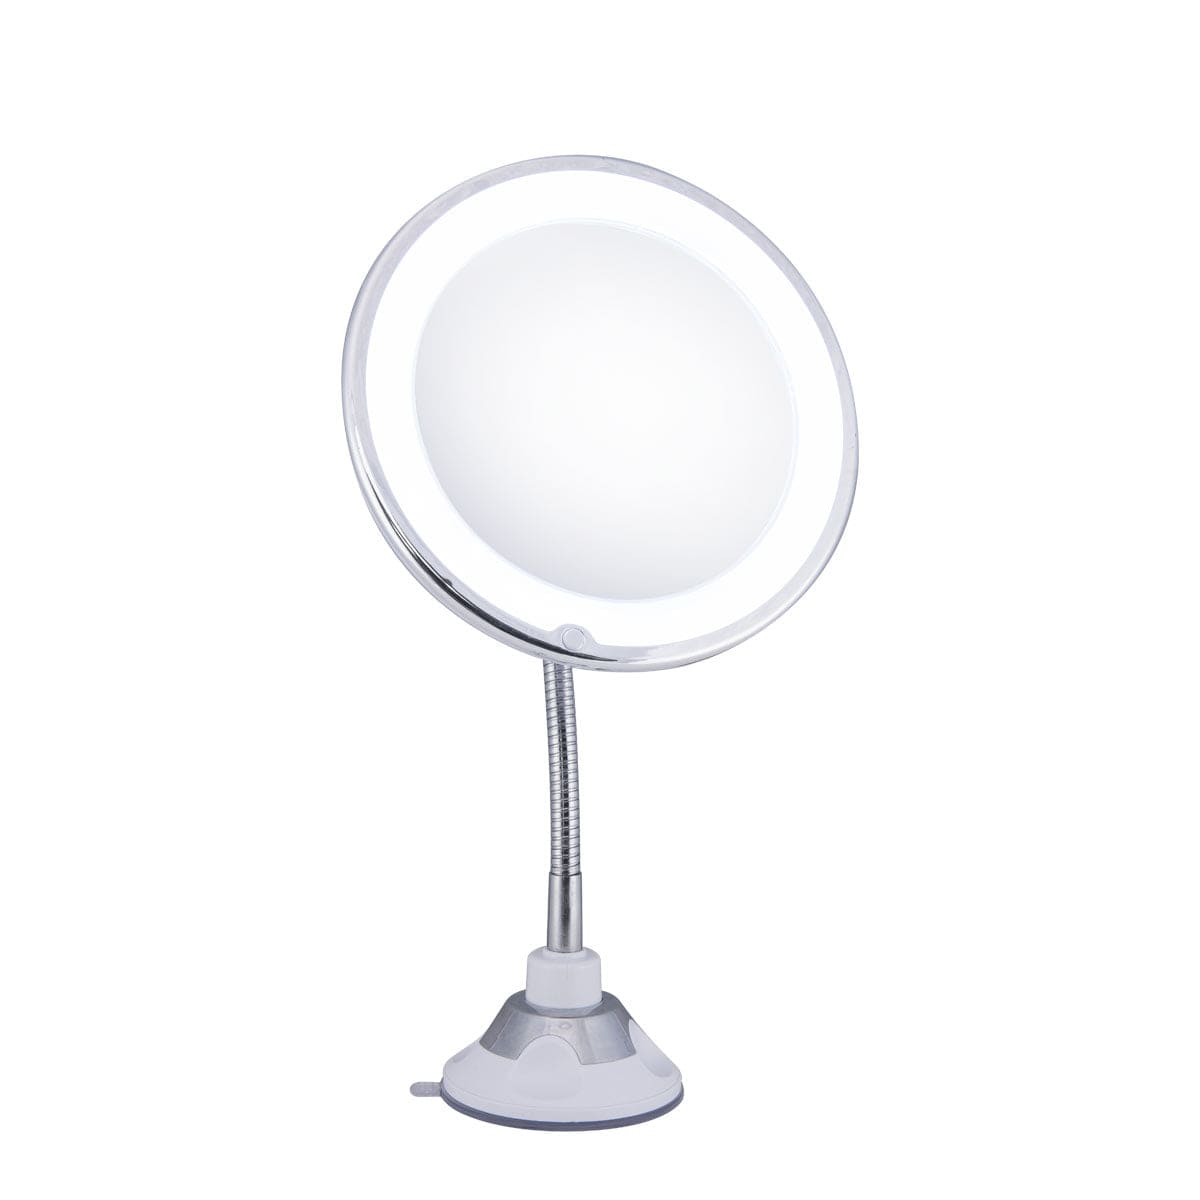 10x Magnifying Mirror with LED light